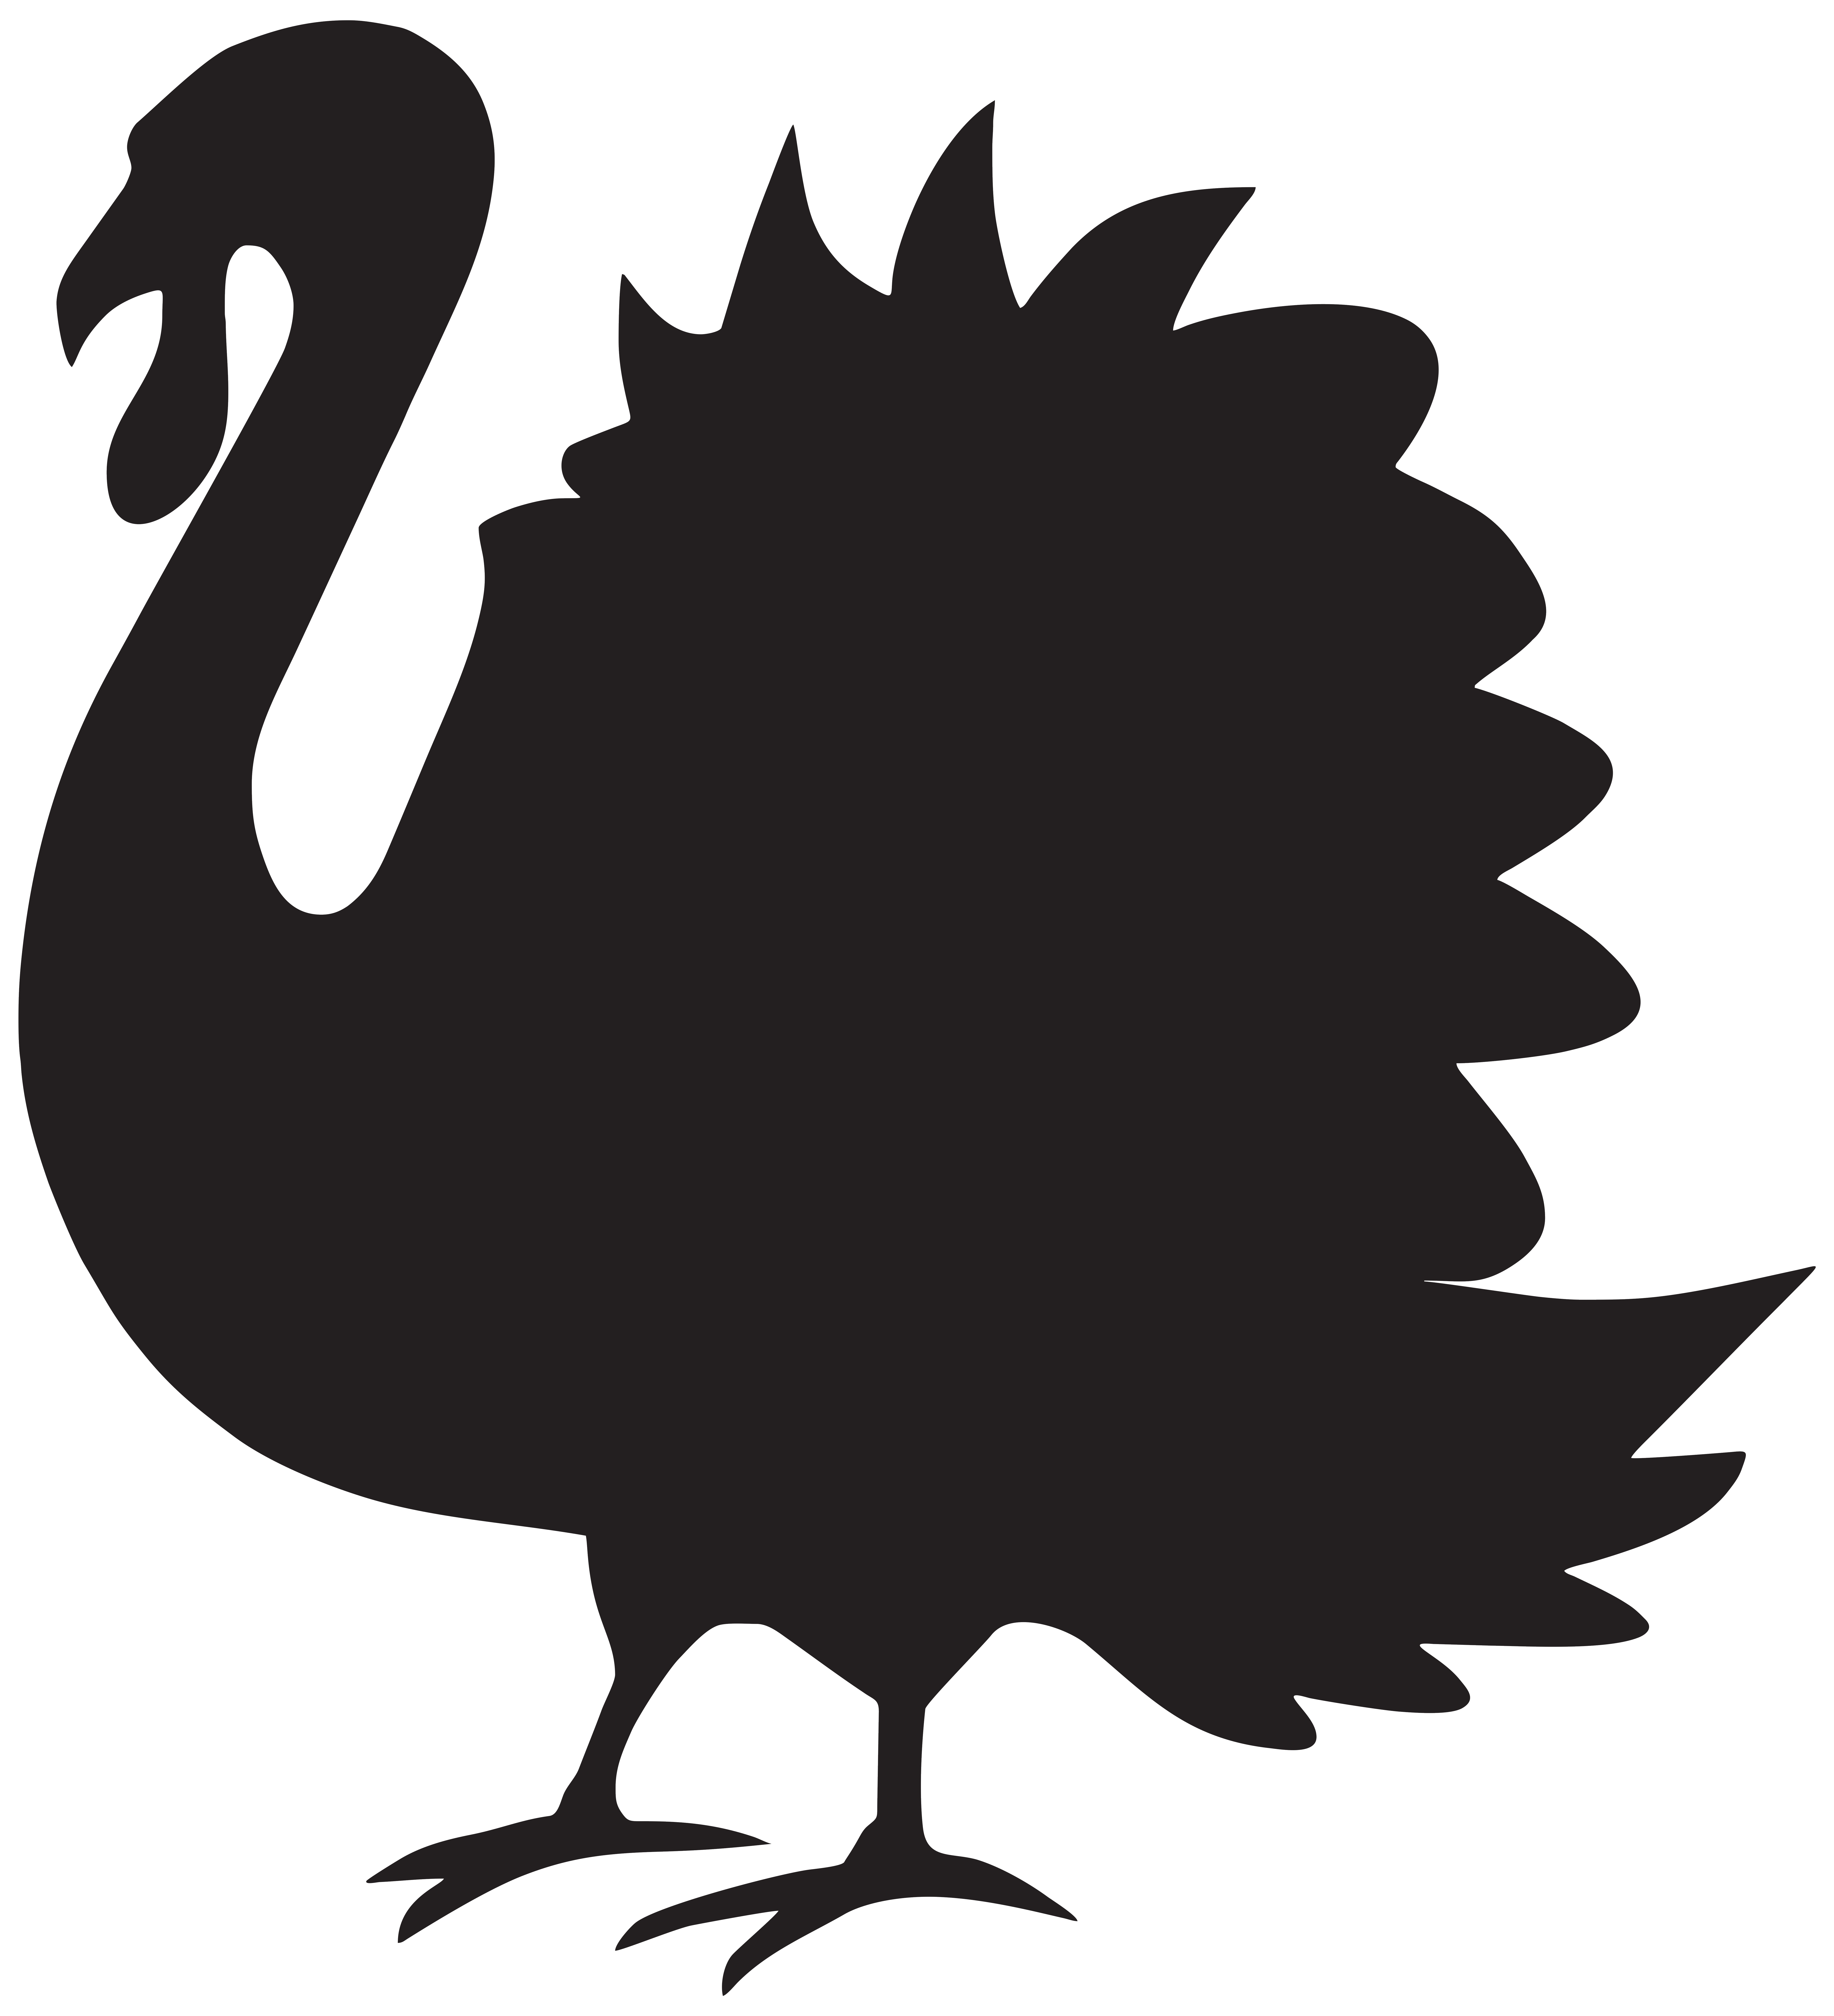 Clipart turkey body. Silhouette at getdrawings com